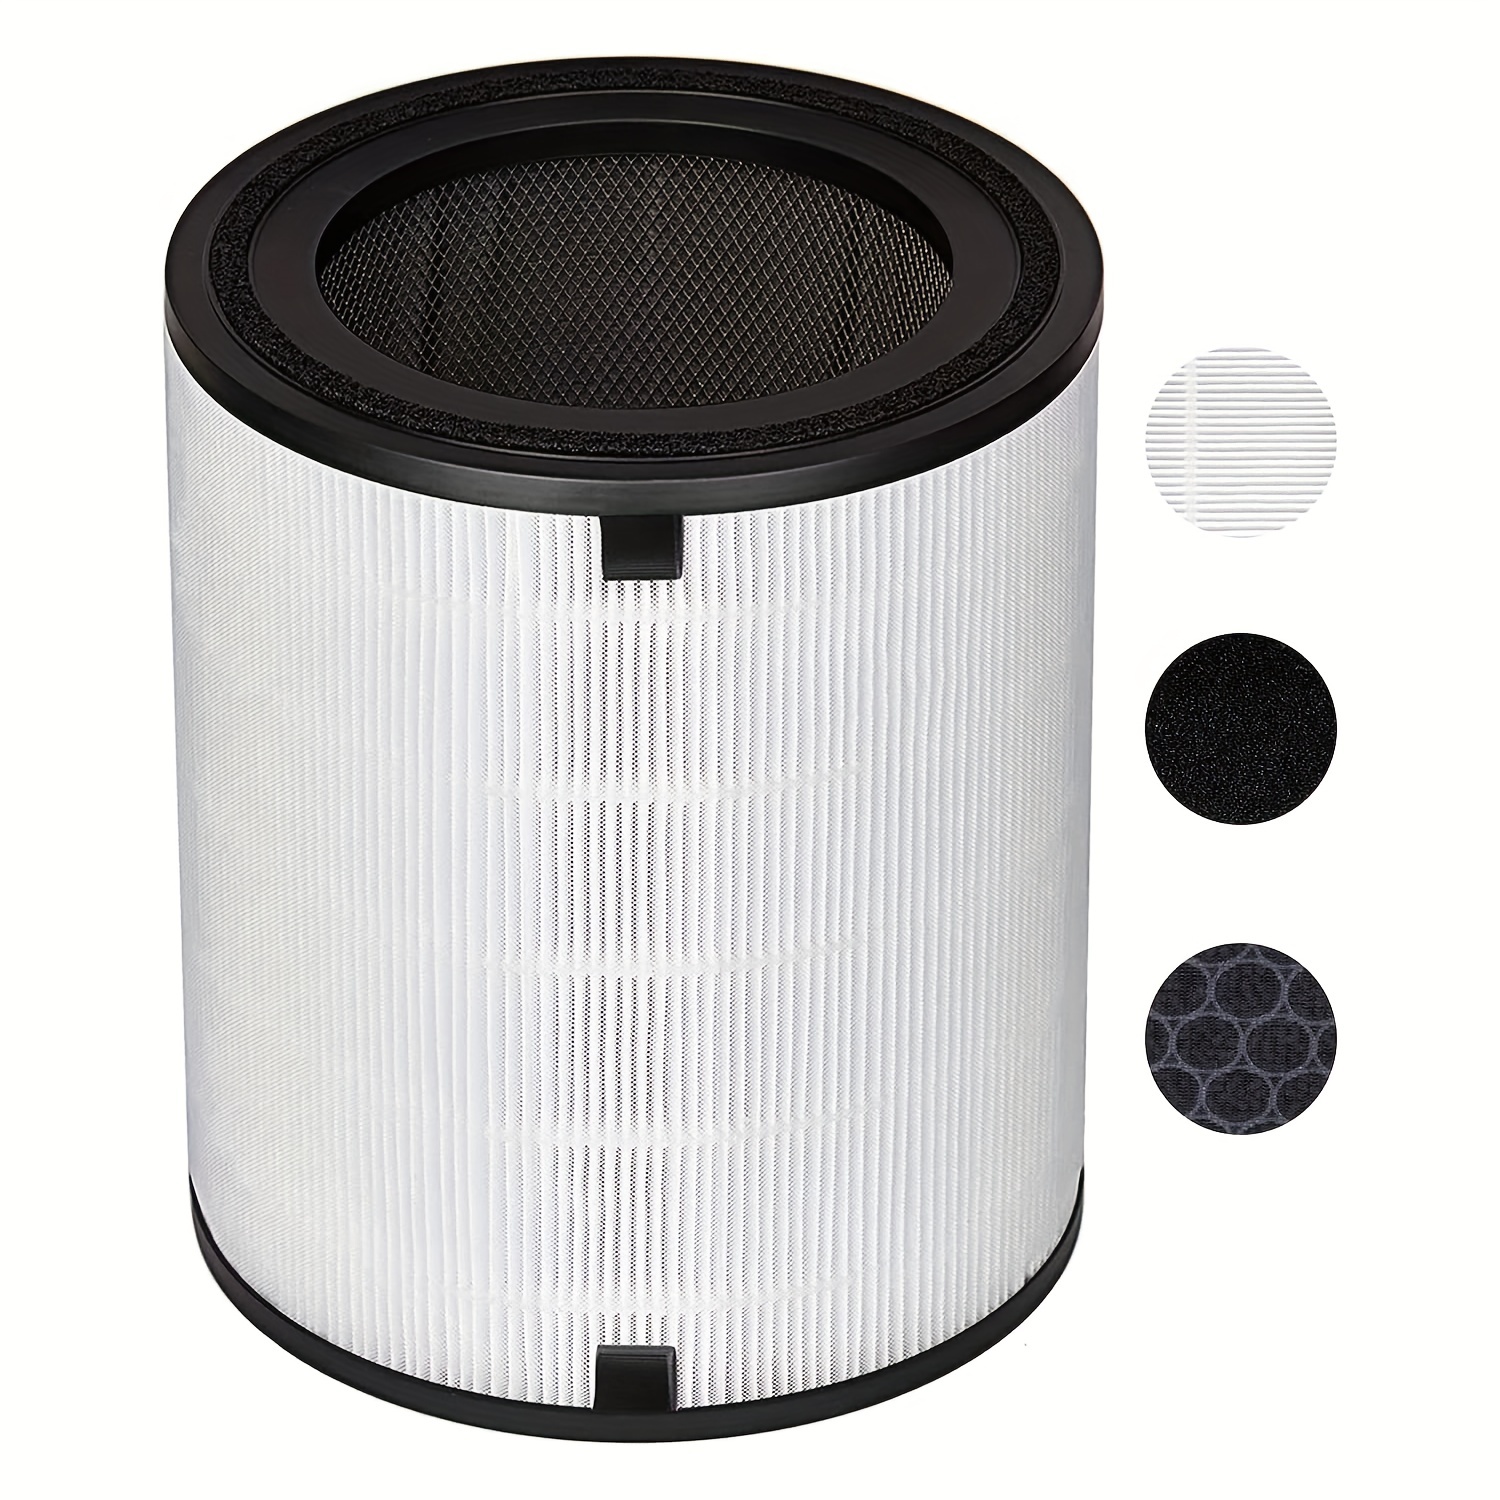 OEM LV-H128 Air Smoke Filter LV Set Replacement for Levoit H128